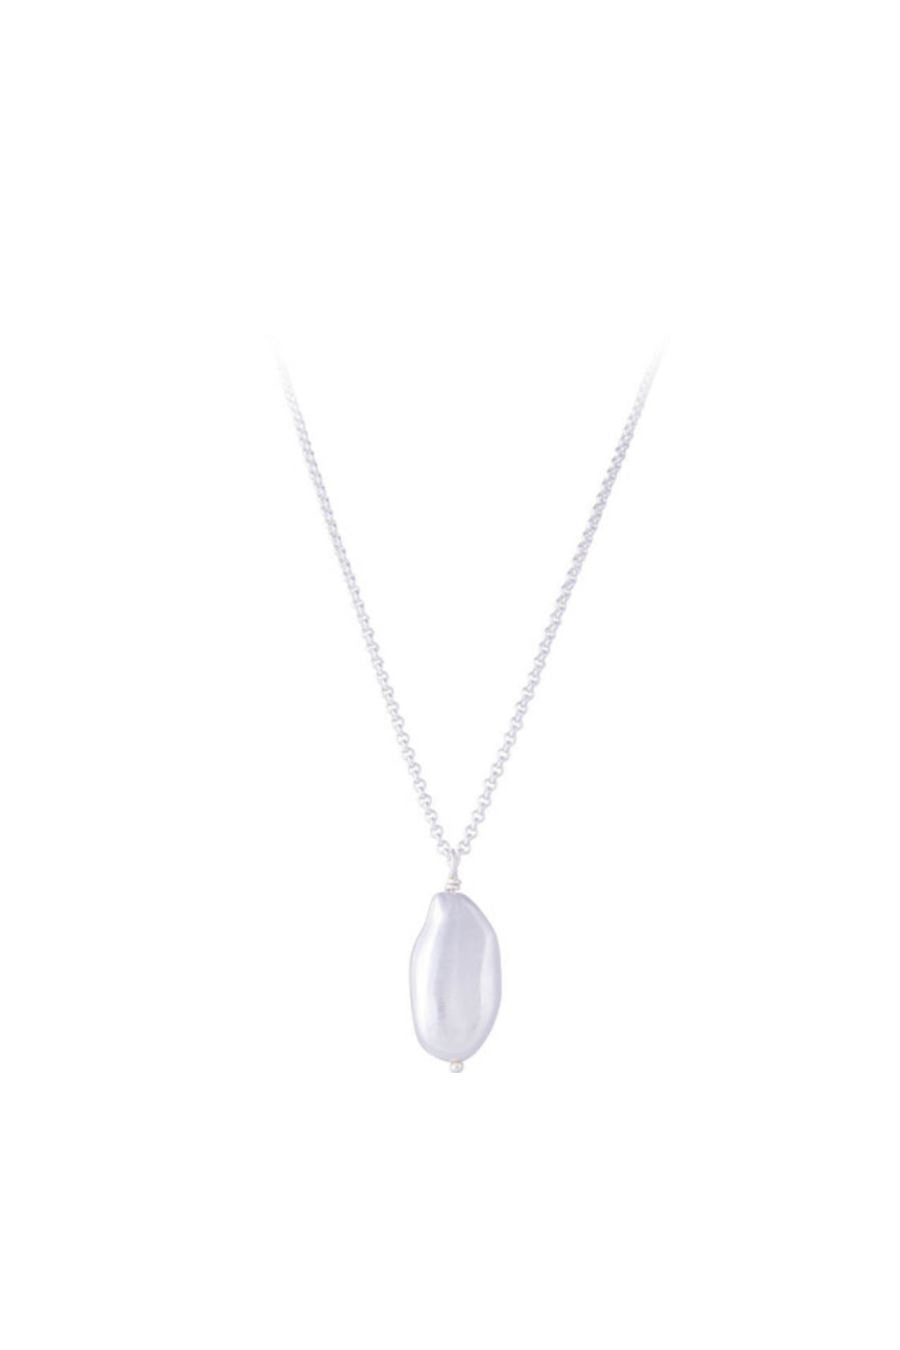 FAIRLEY Silver Keshi Pearl Necklace